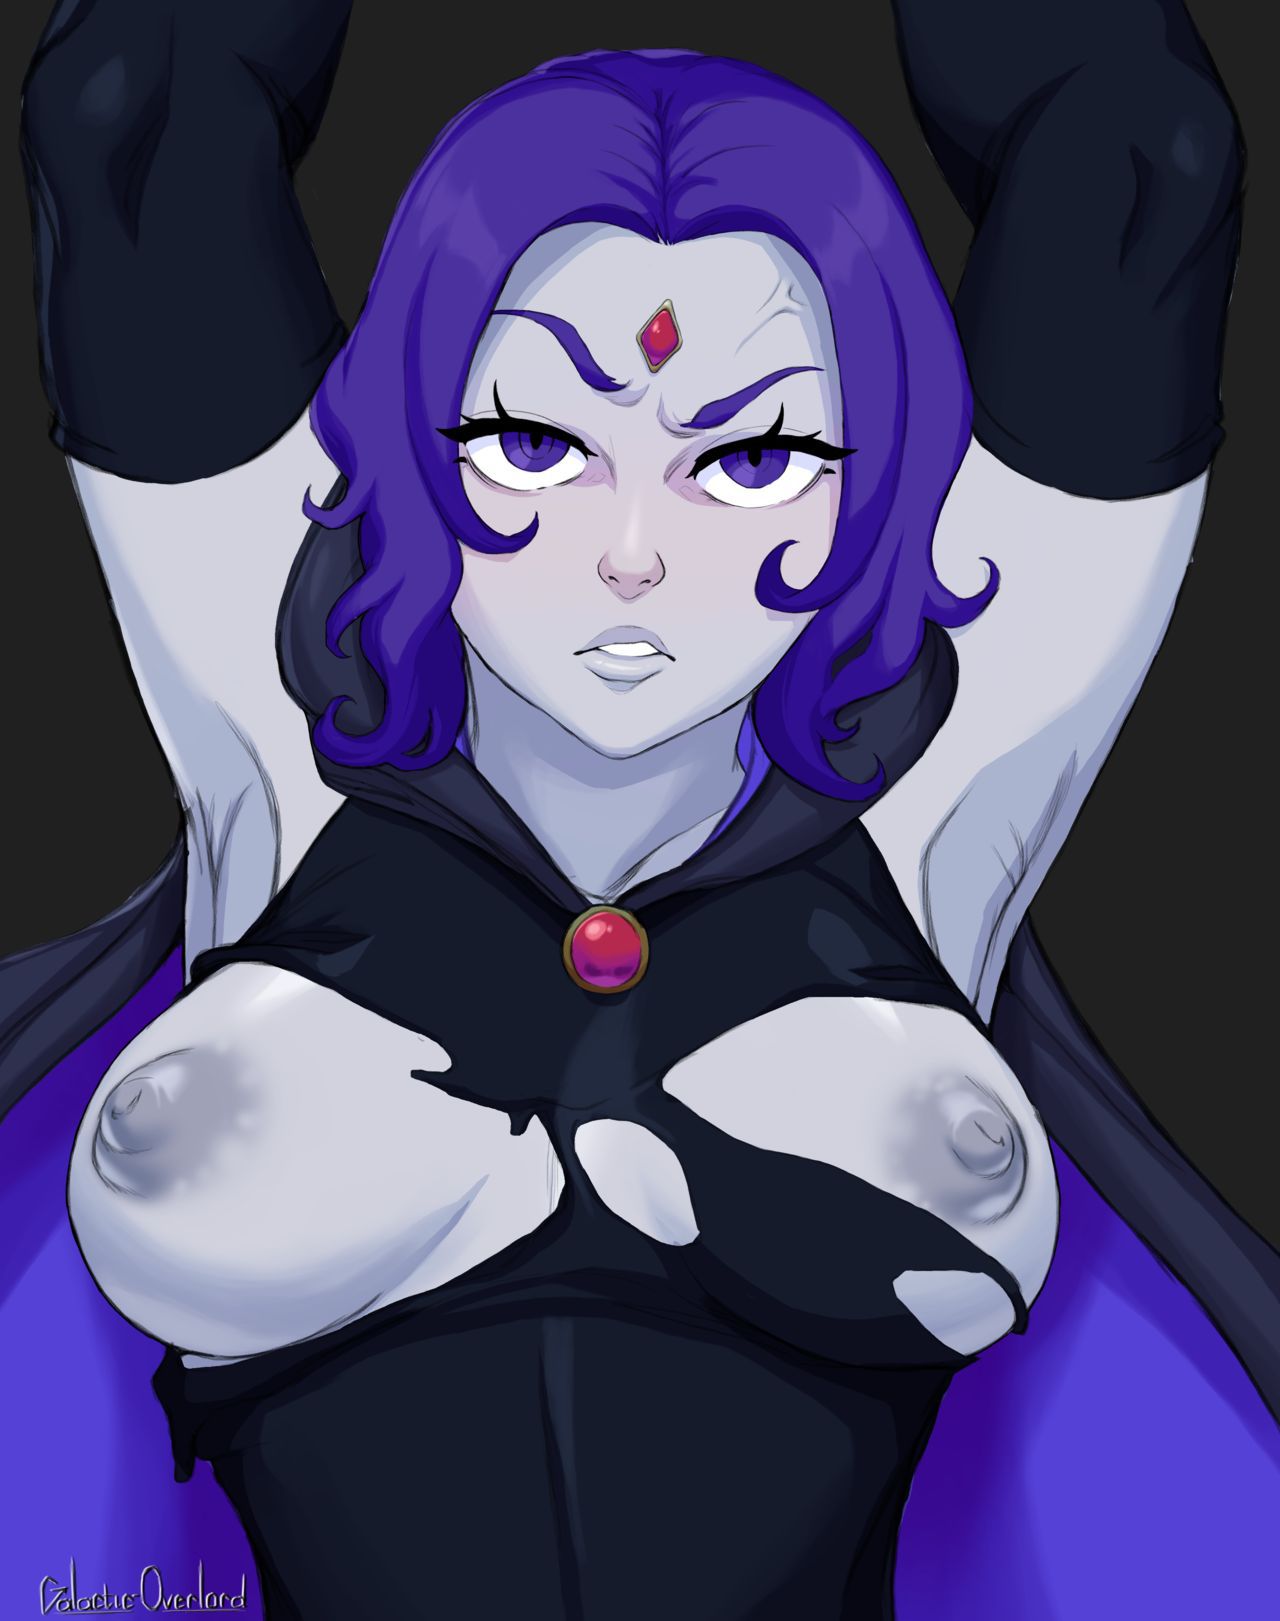 [GalacticOverlord] Raven 1